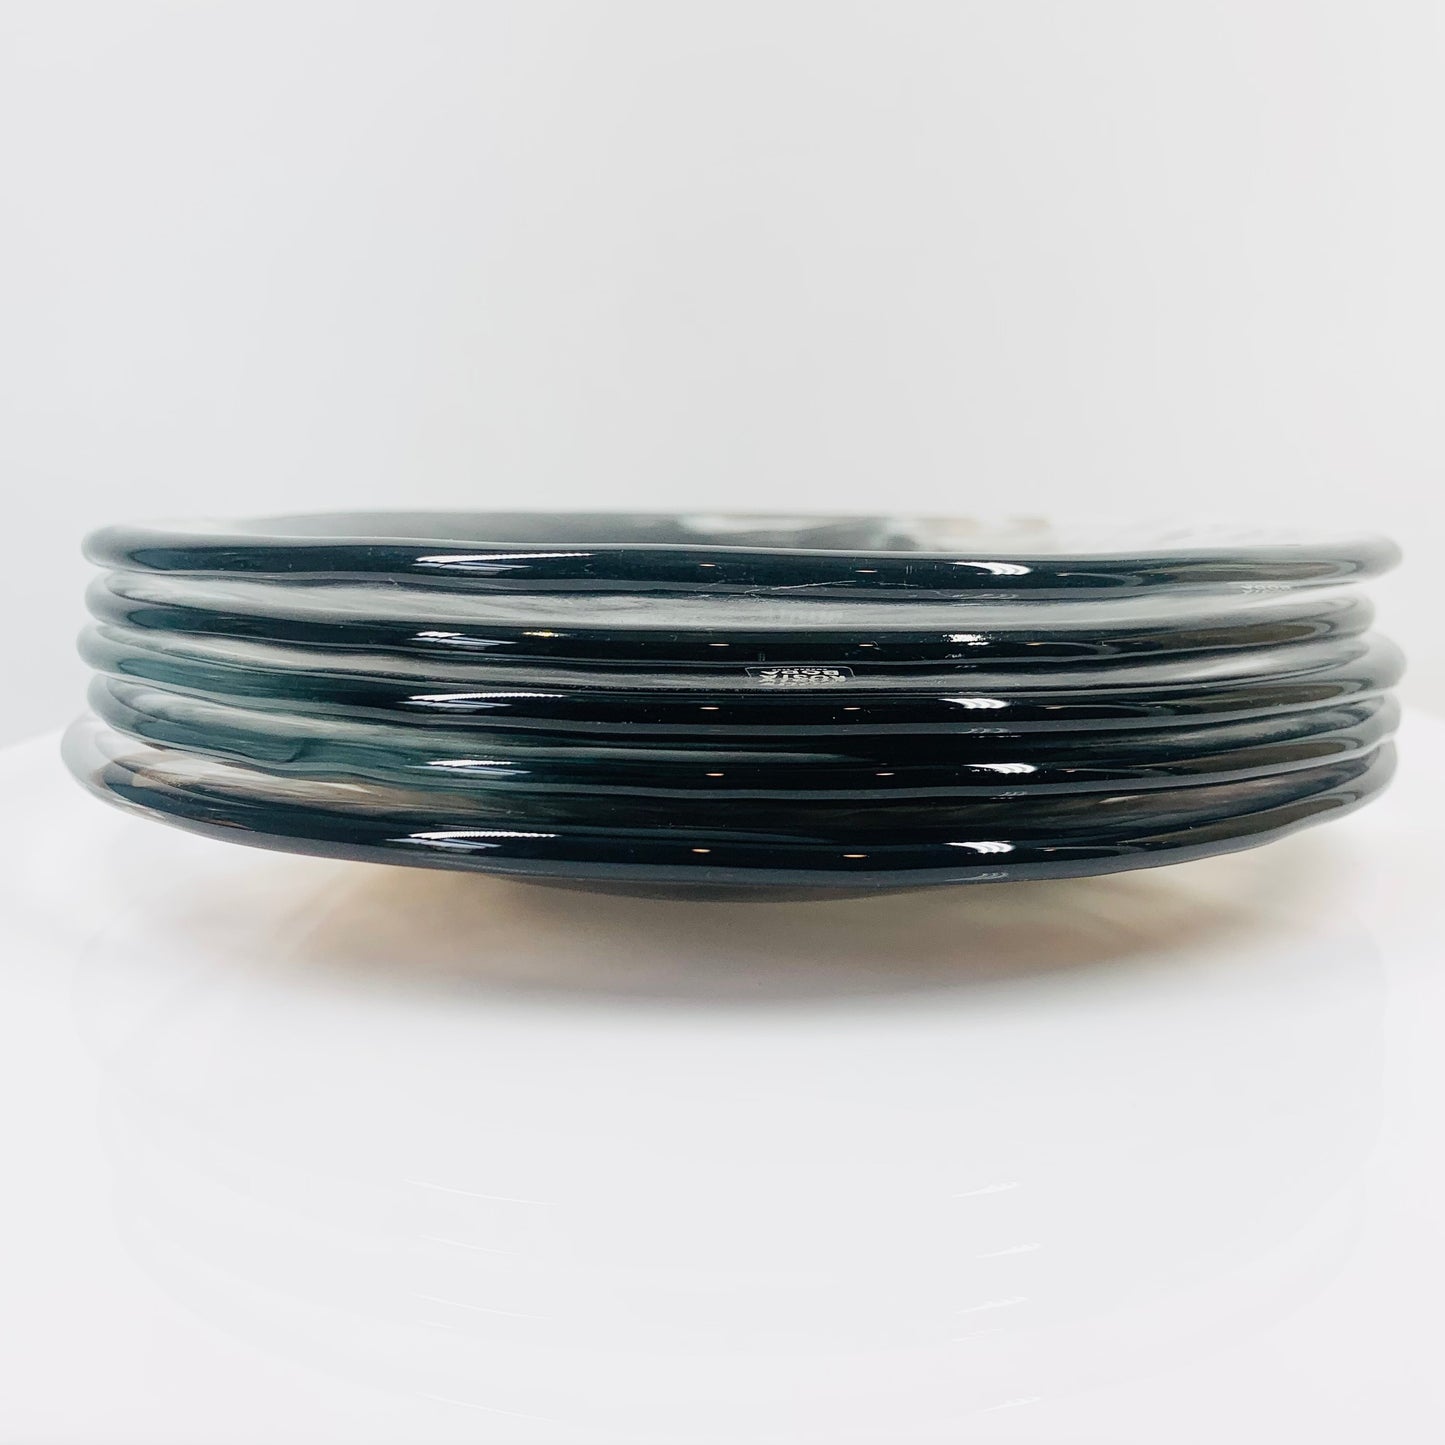 Vintage Kosta Boda hand made glass plate in the Mine series